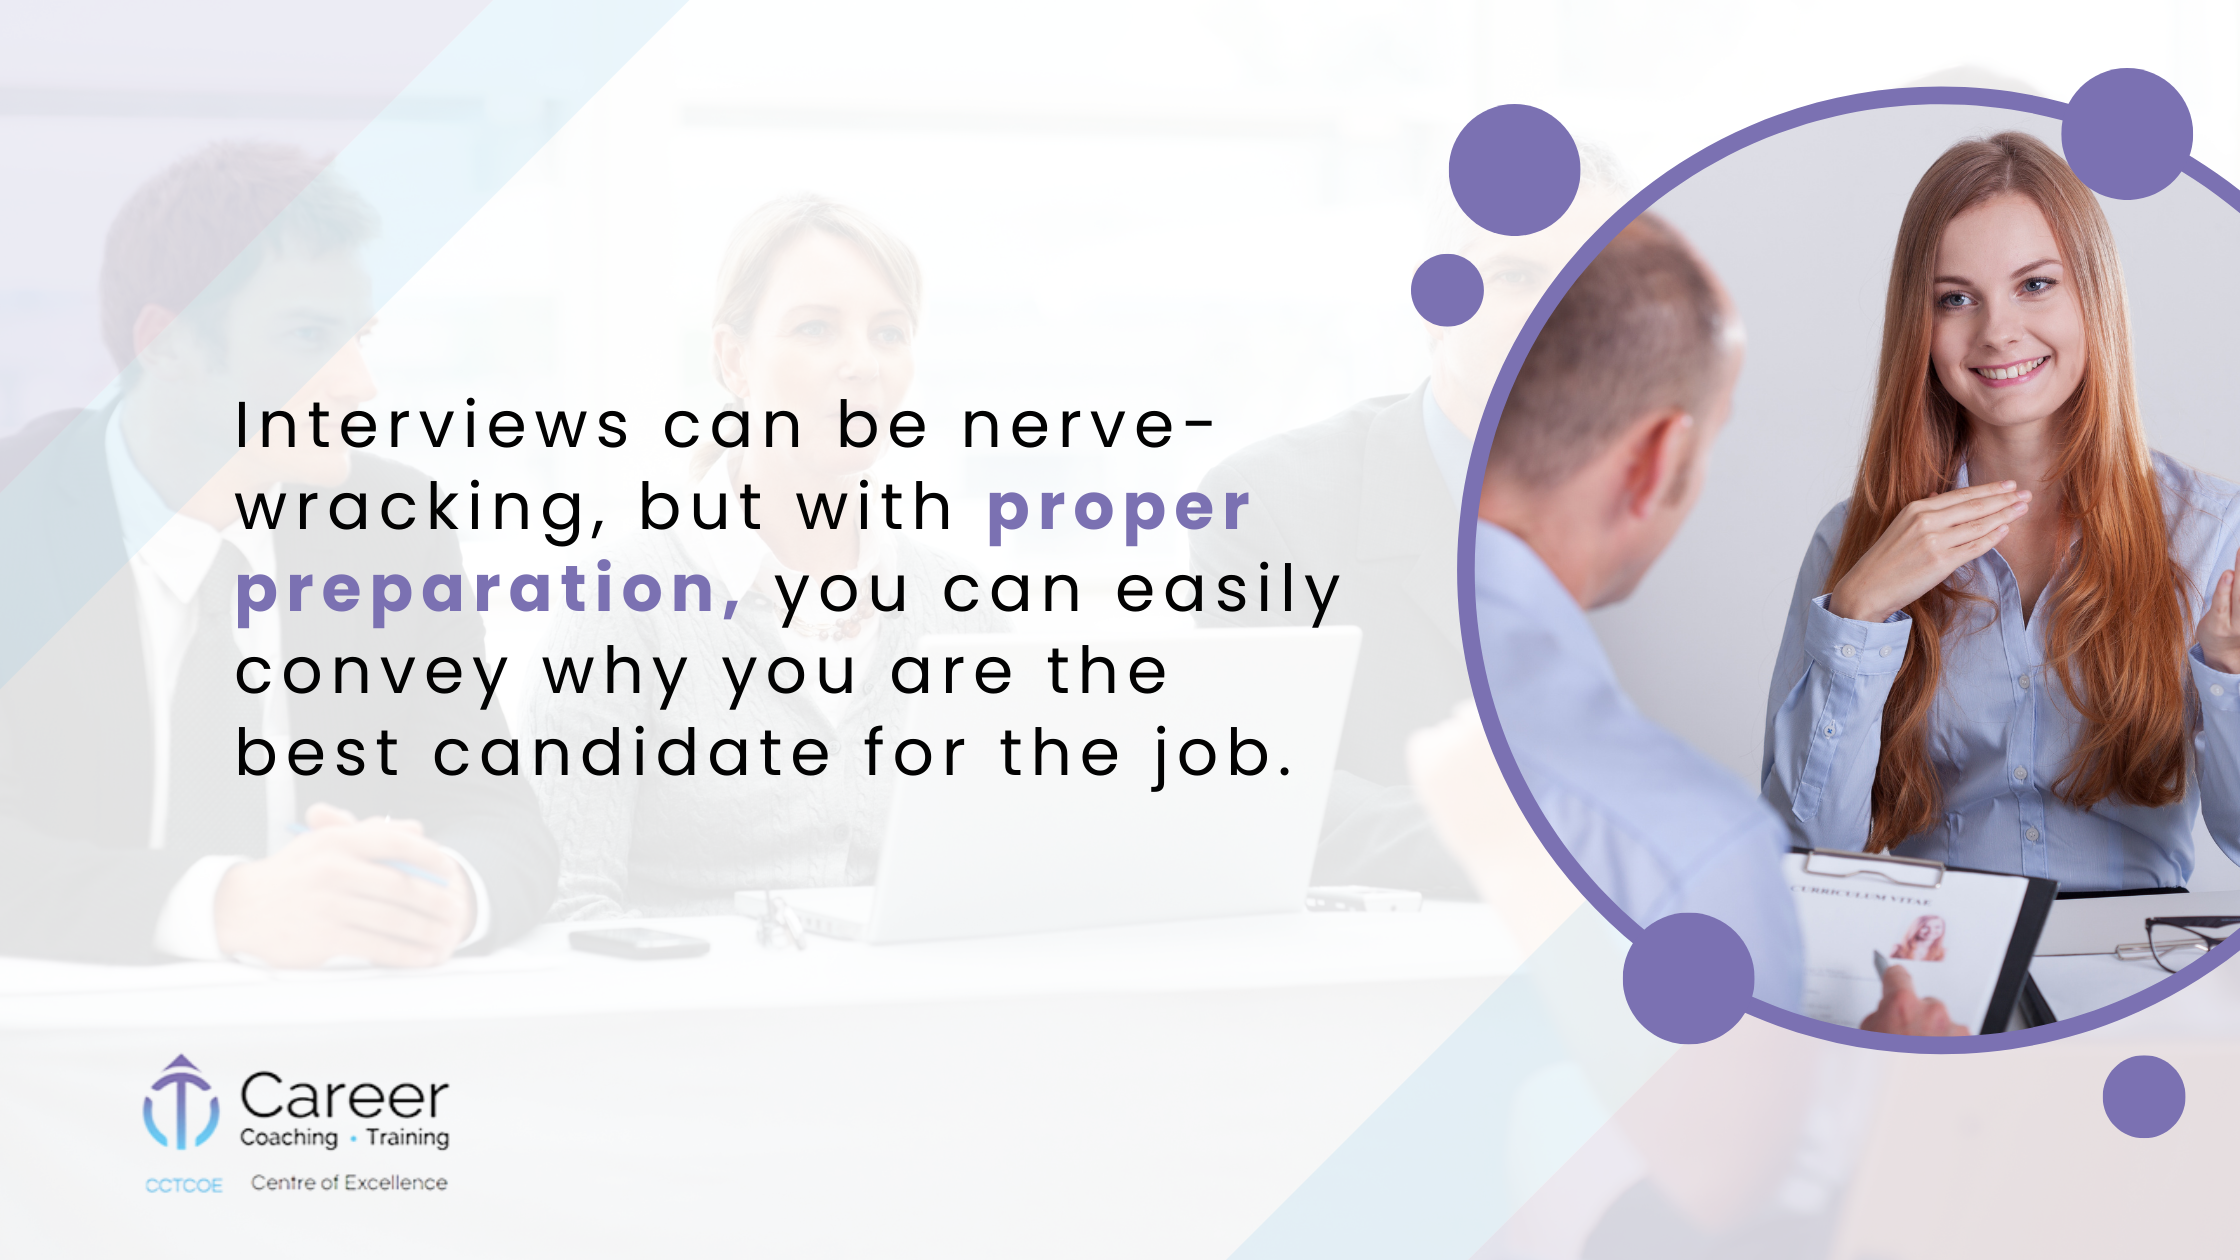 Interviews can be nerve-wracking, but with proper preparation, you can easily convey why you are the best candidate for the job.